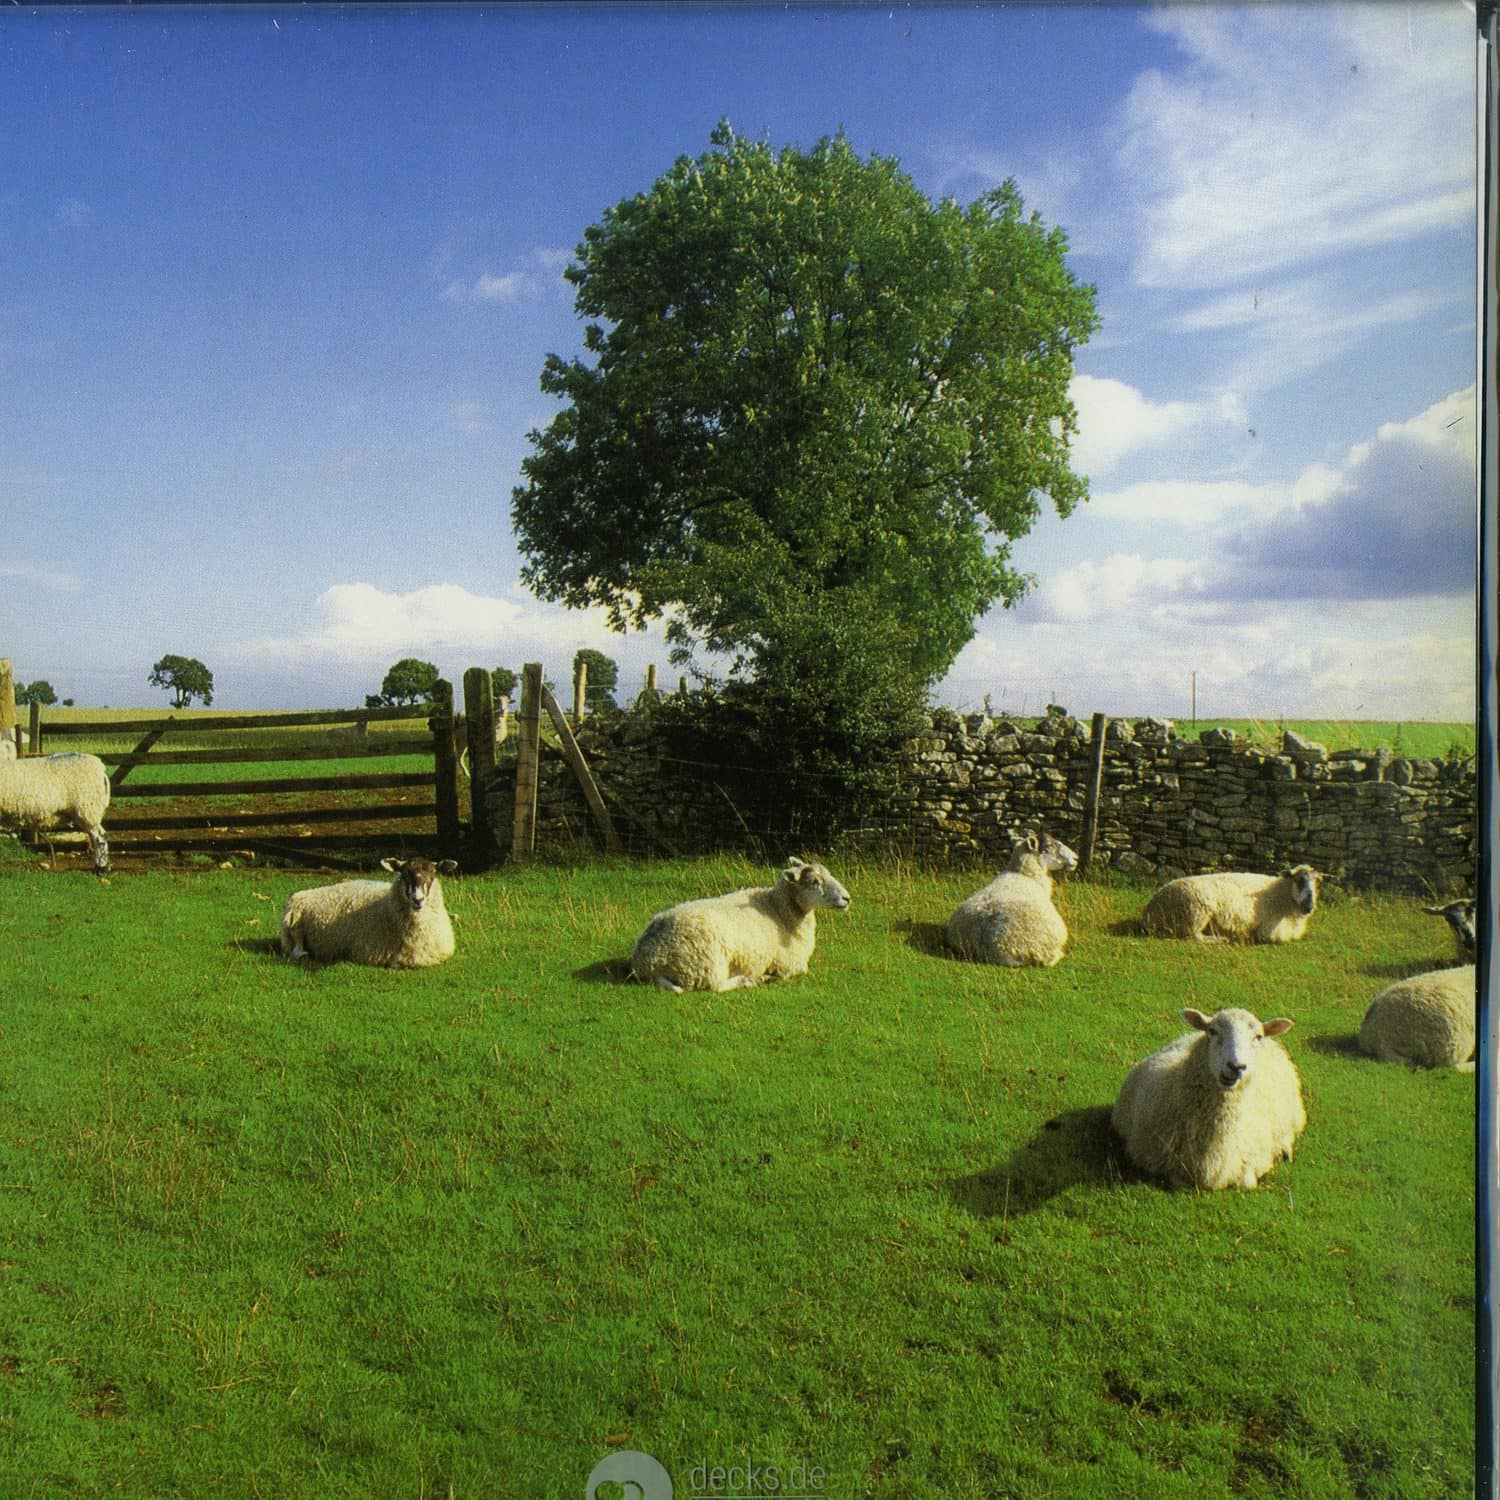 KLF - CHILL OUT 